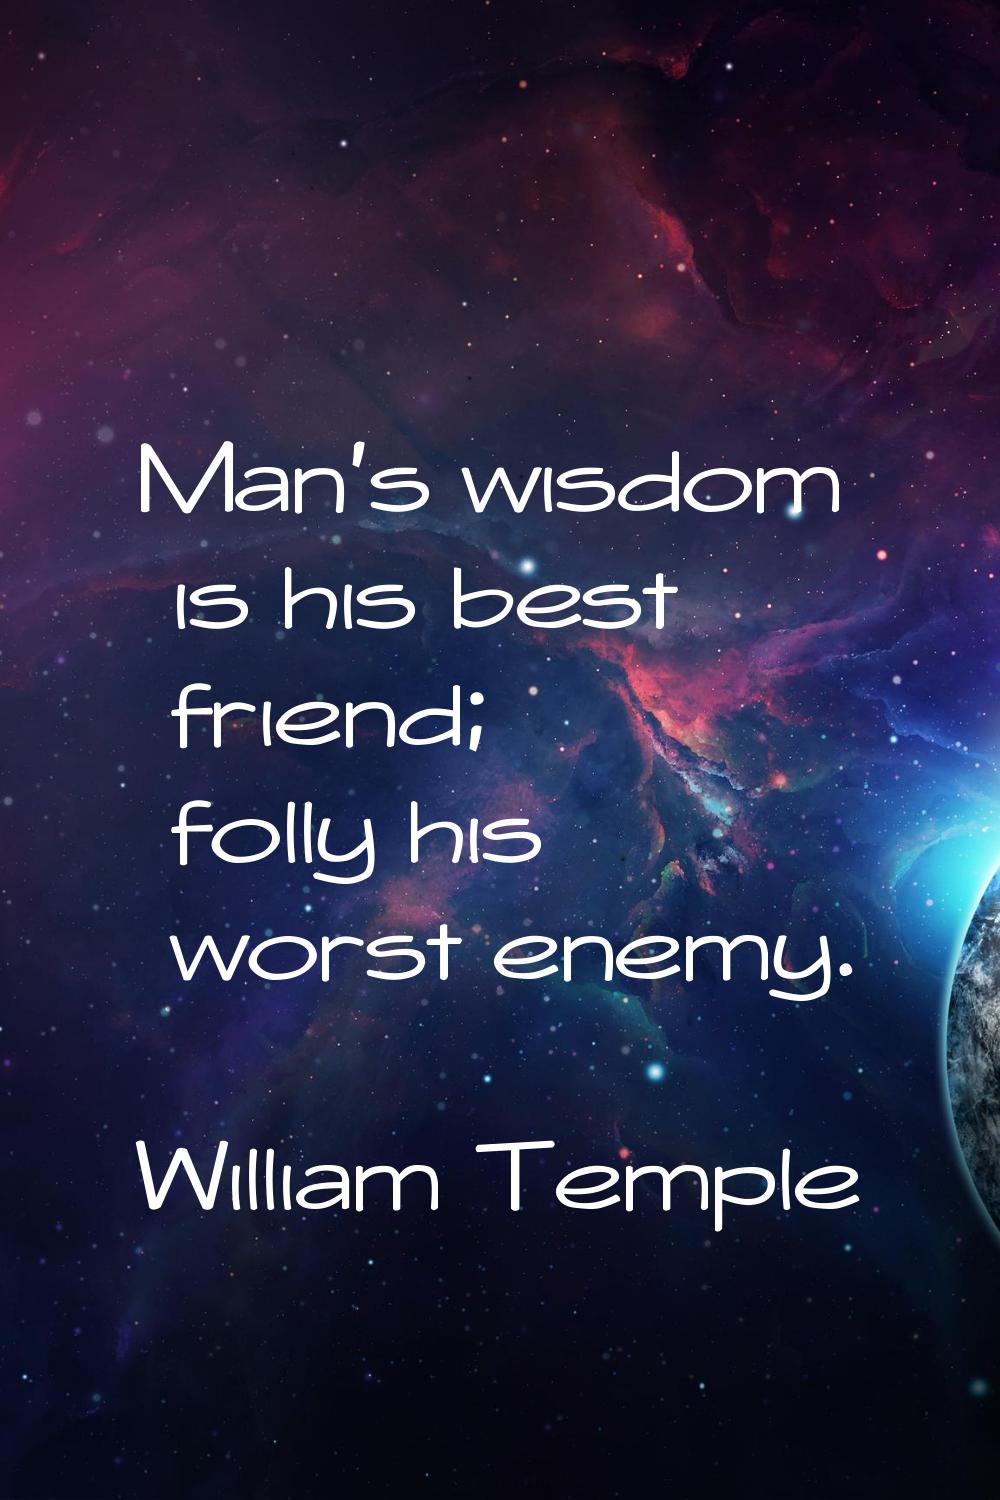 Man's wisdom is his best friend; folly his worst enemy.